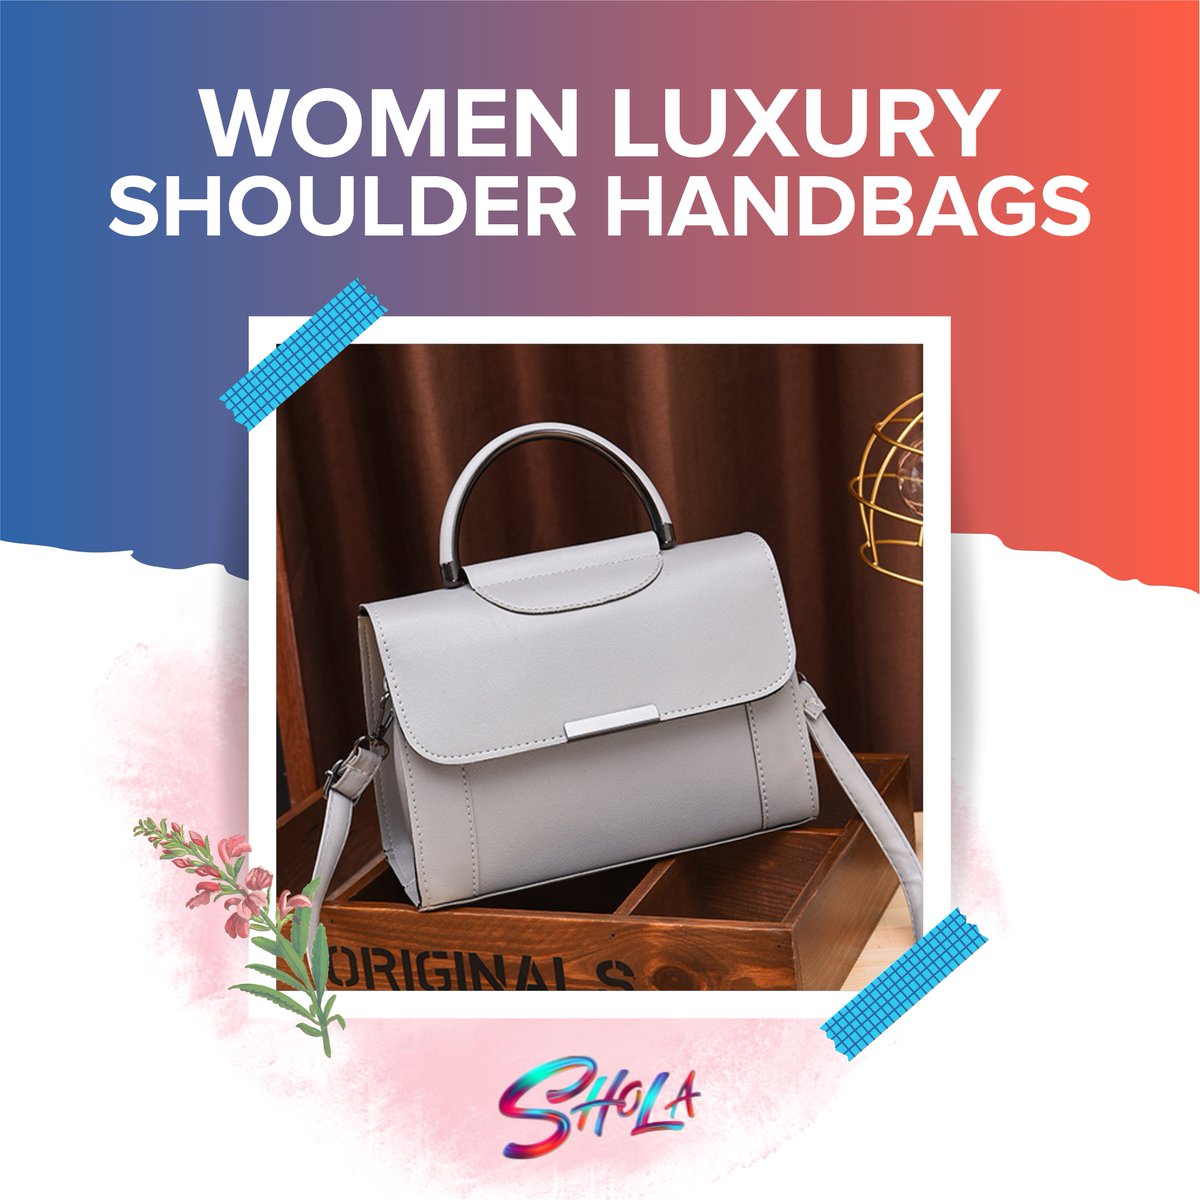 👸💼✨ Elevate your style with luxury shoulder handbags for women!
---
🛍️ bit.ly/45X5HUn
.
.
.
#amhara #fano #ethiopia #ፋኖ #አማራ #ኢትዮጵያ #አማራፋኖ #LuxuryHandbags
#Fashionista
#ShoulderBagStyle
#LuxuryLifestyle
#BagLover
#WomenFashion